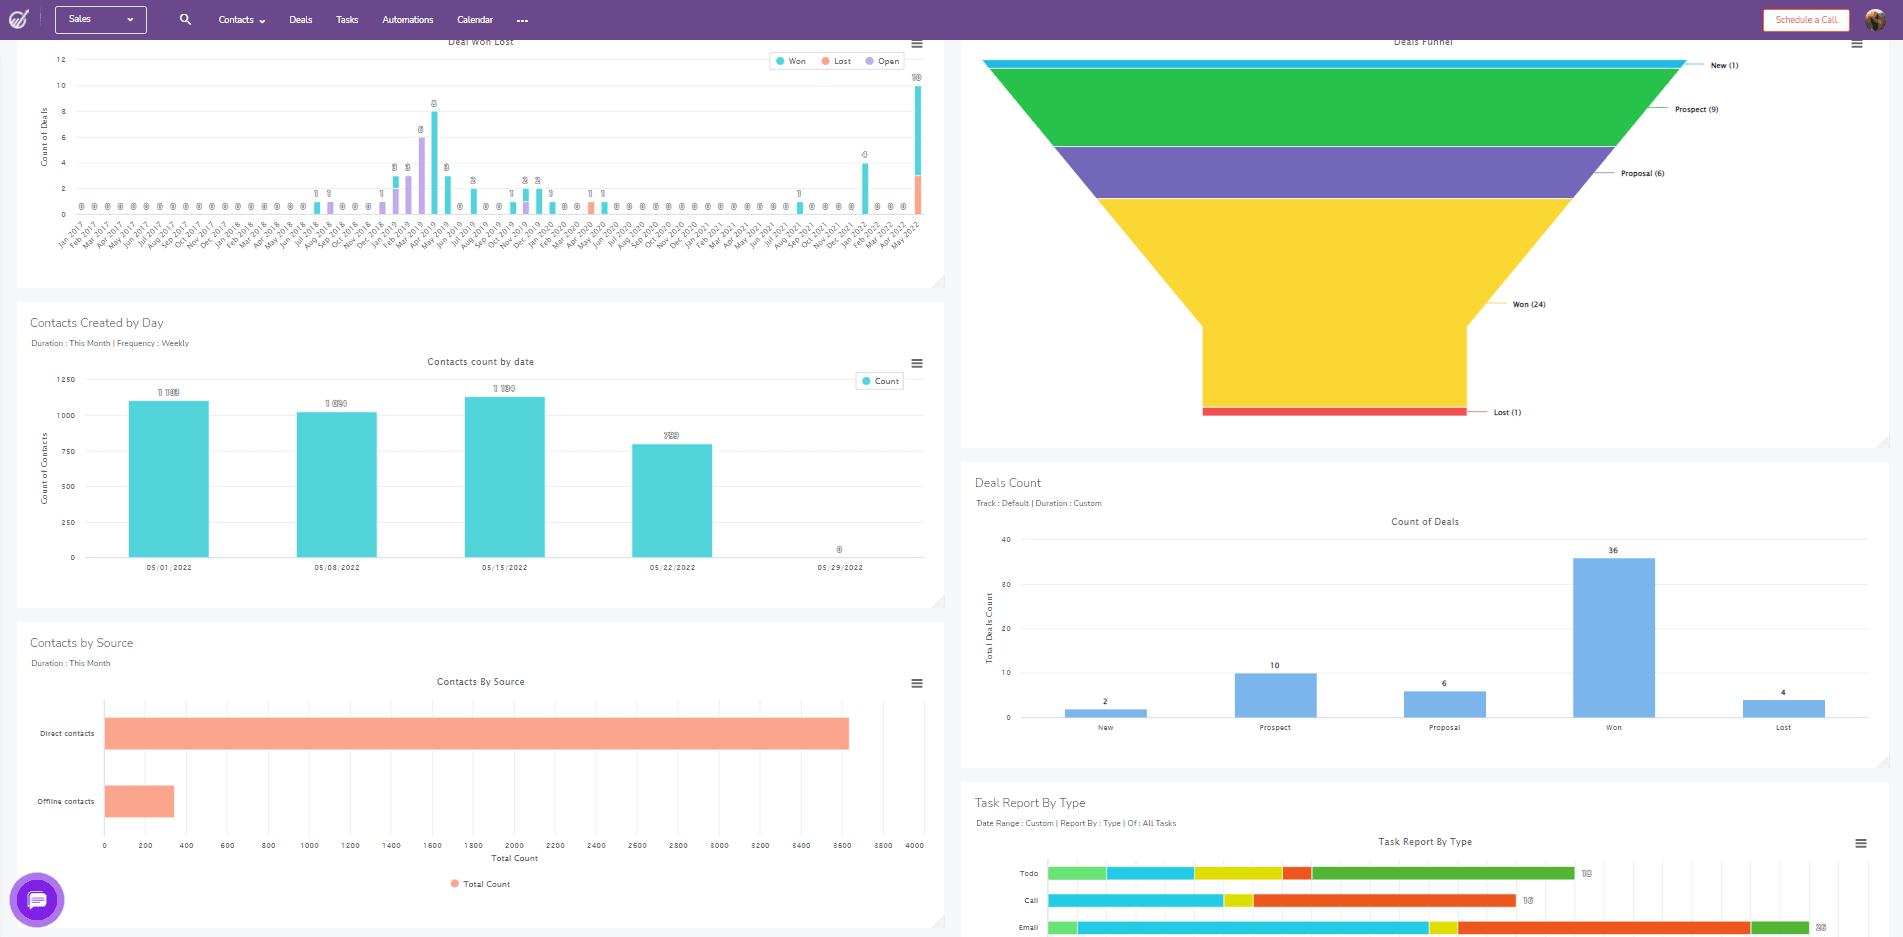 Sales cycle length dashboard example from EngageBay